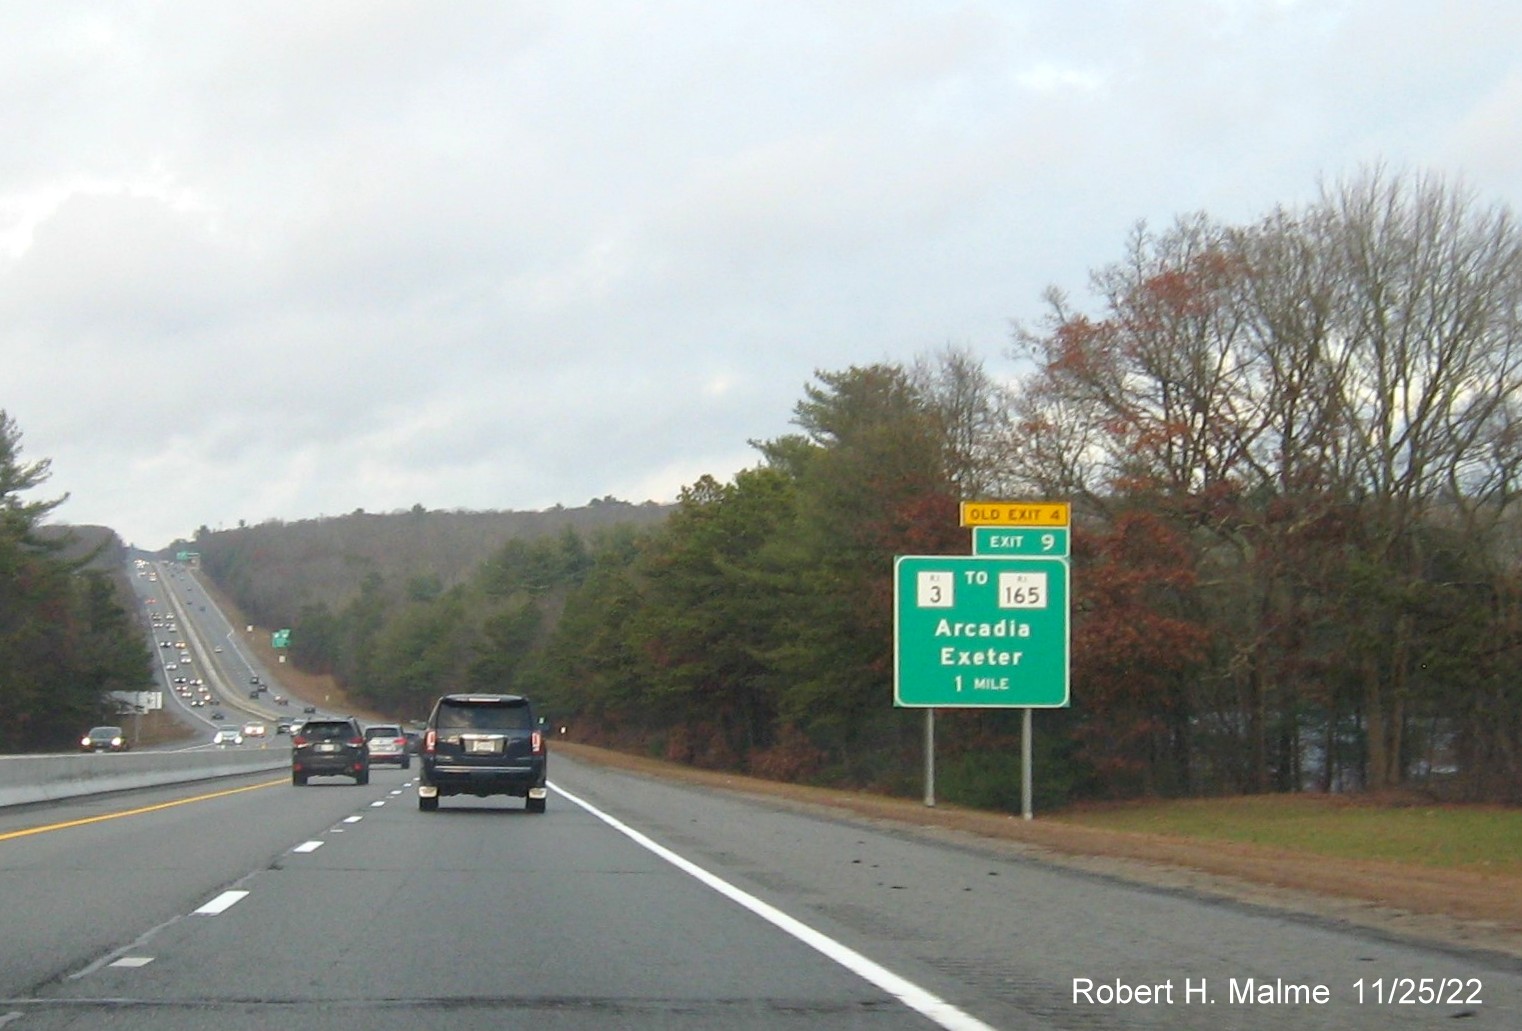 Image of ground mounted 1 mile advance sign for RI 3 to RI 165 exit with new milepost based exit number on I-95 North in Arcadia, November 2022 